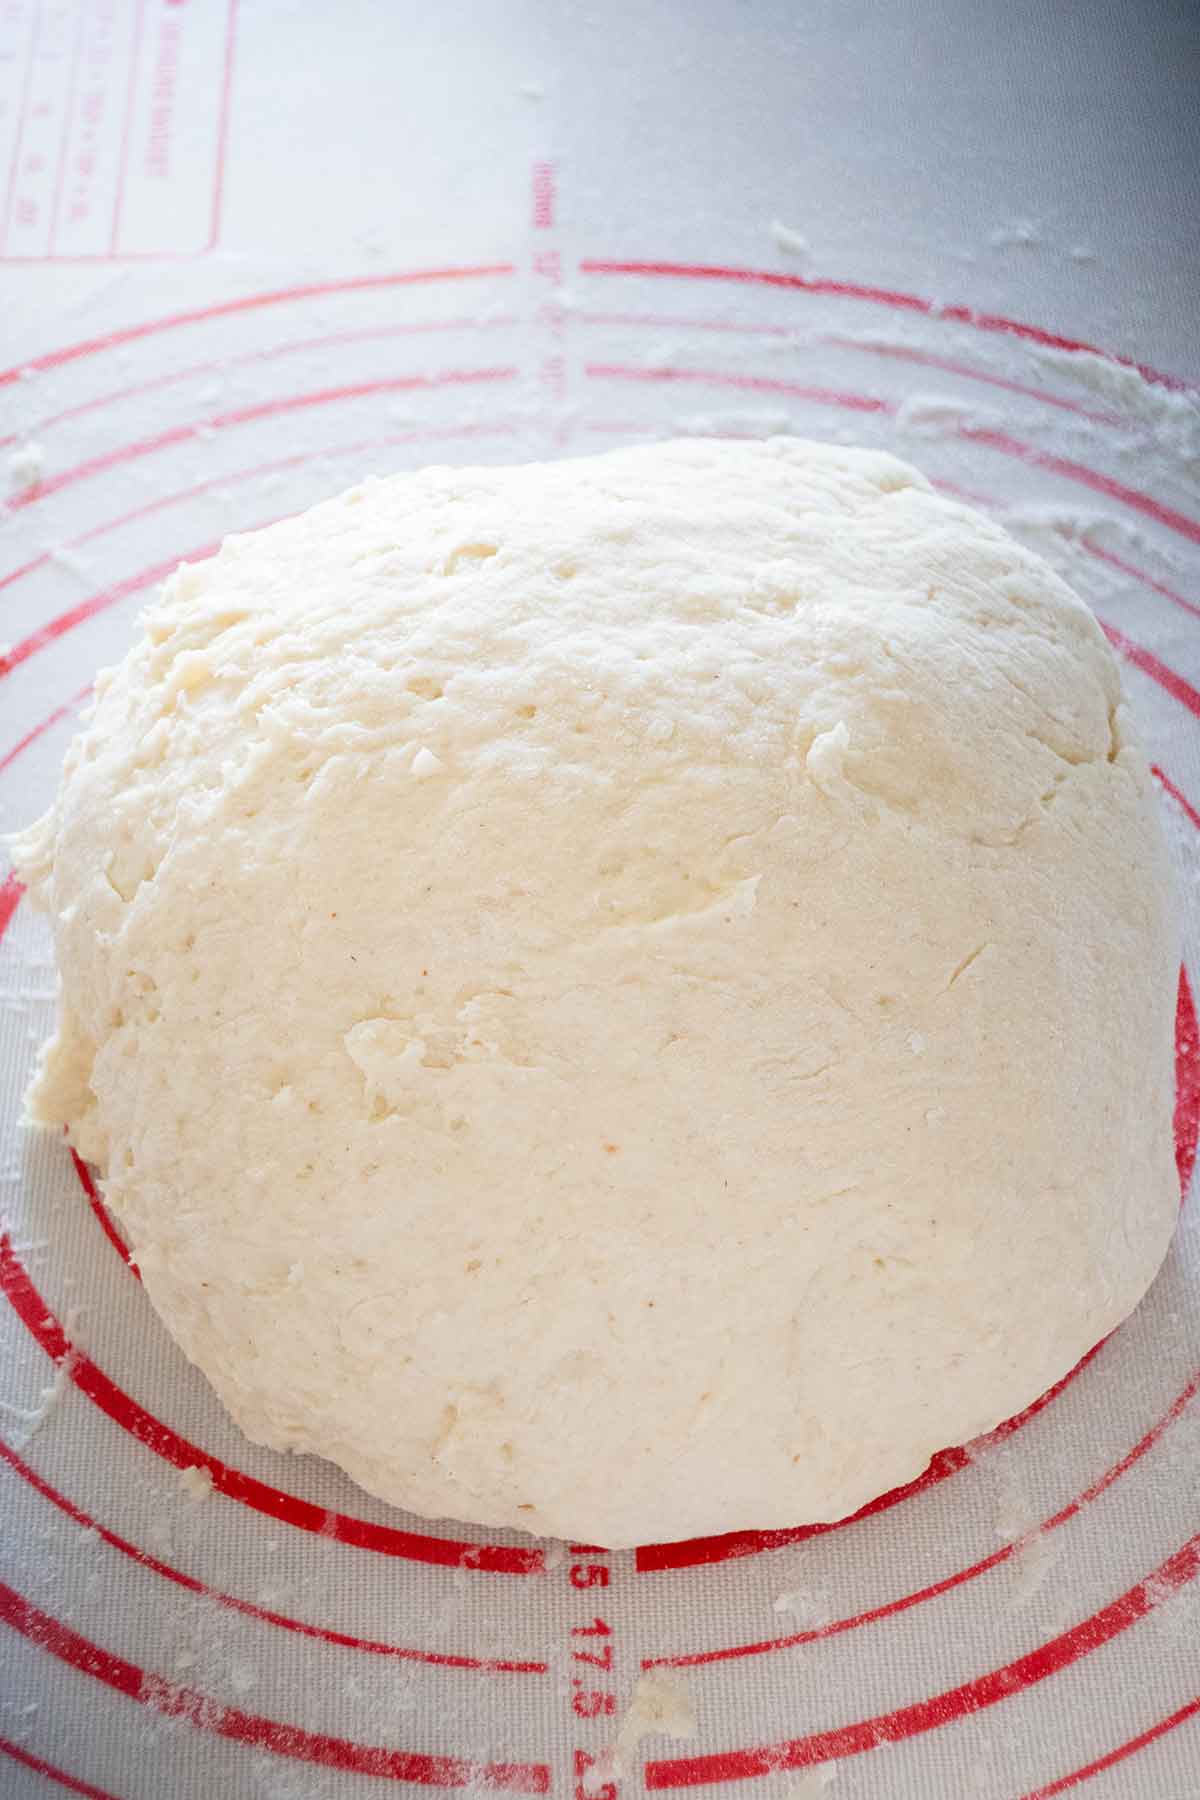 chilled ball of dough 